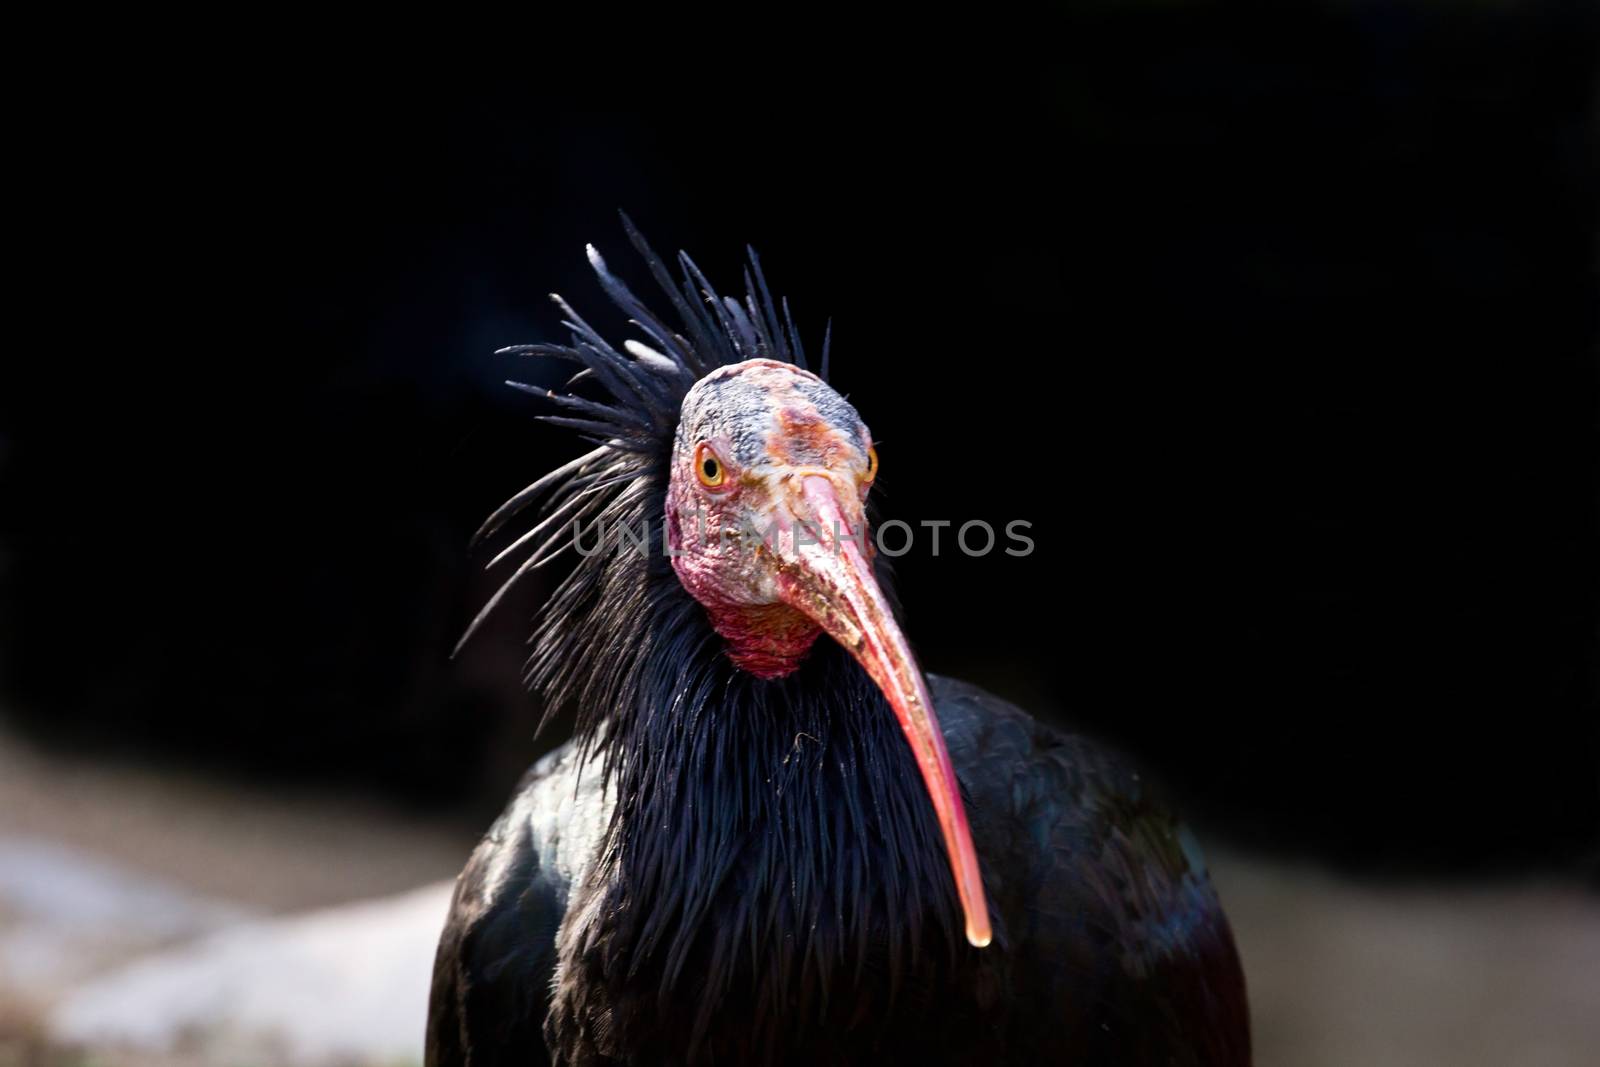 Northern bald ibis observing you